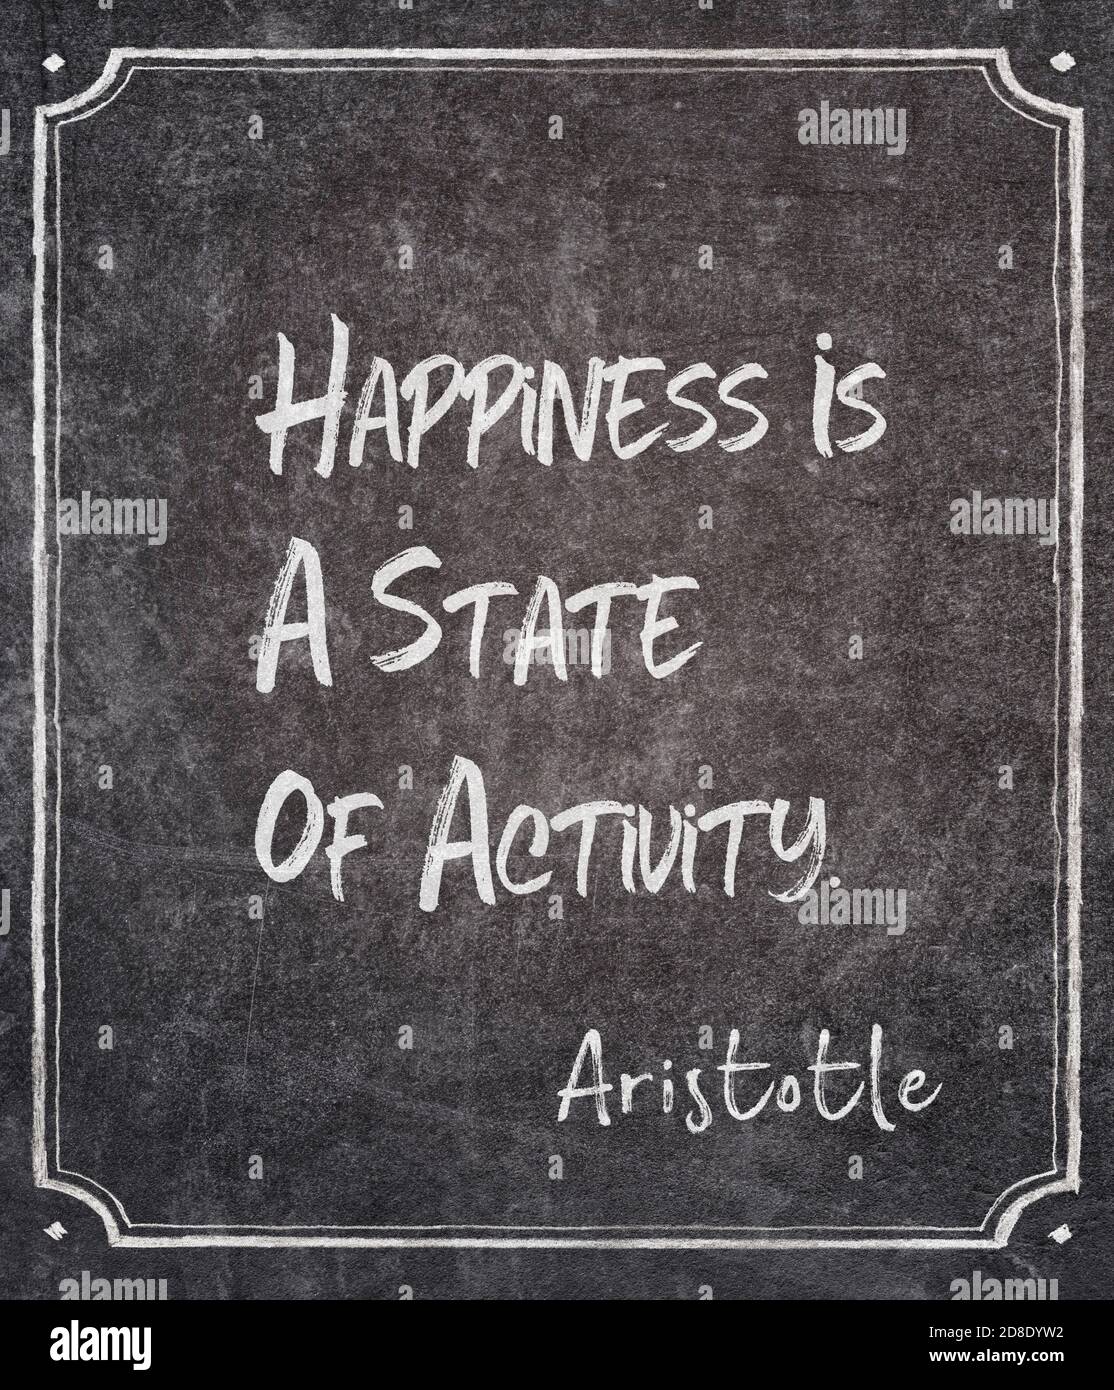 Happiness is a state of activity - ancient Greek philosopher Aristotle quote written on framed chalkboard Stock Photo